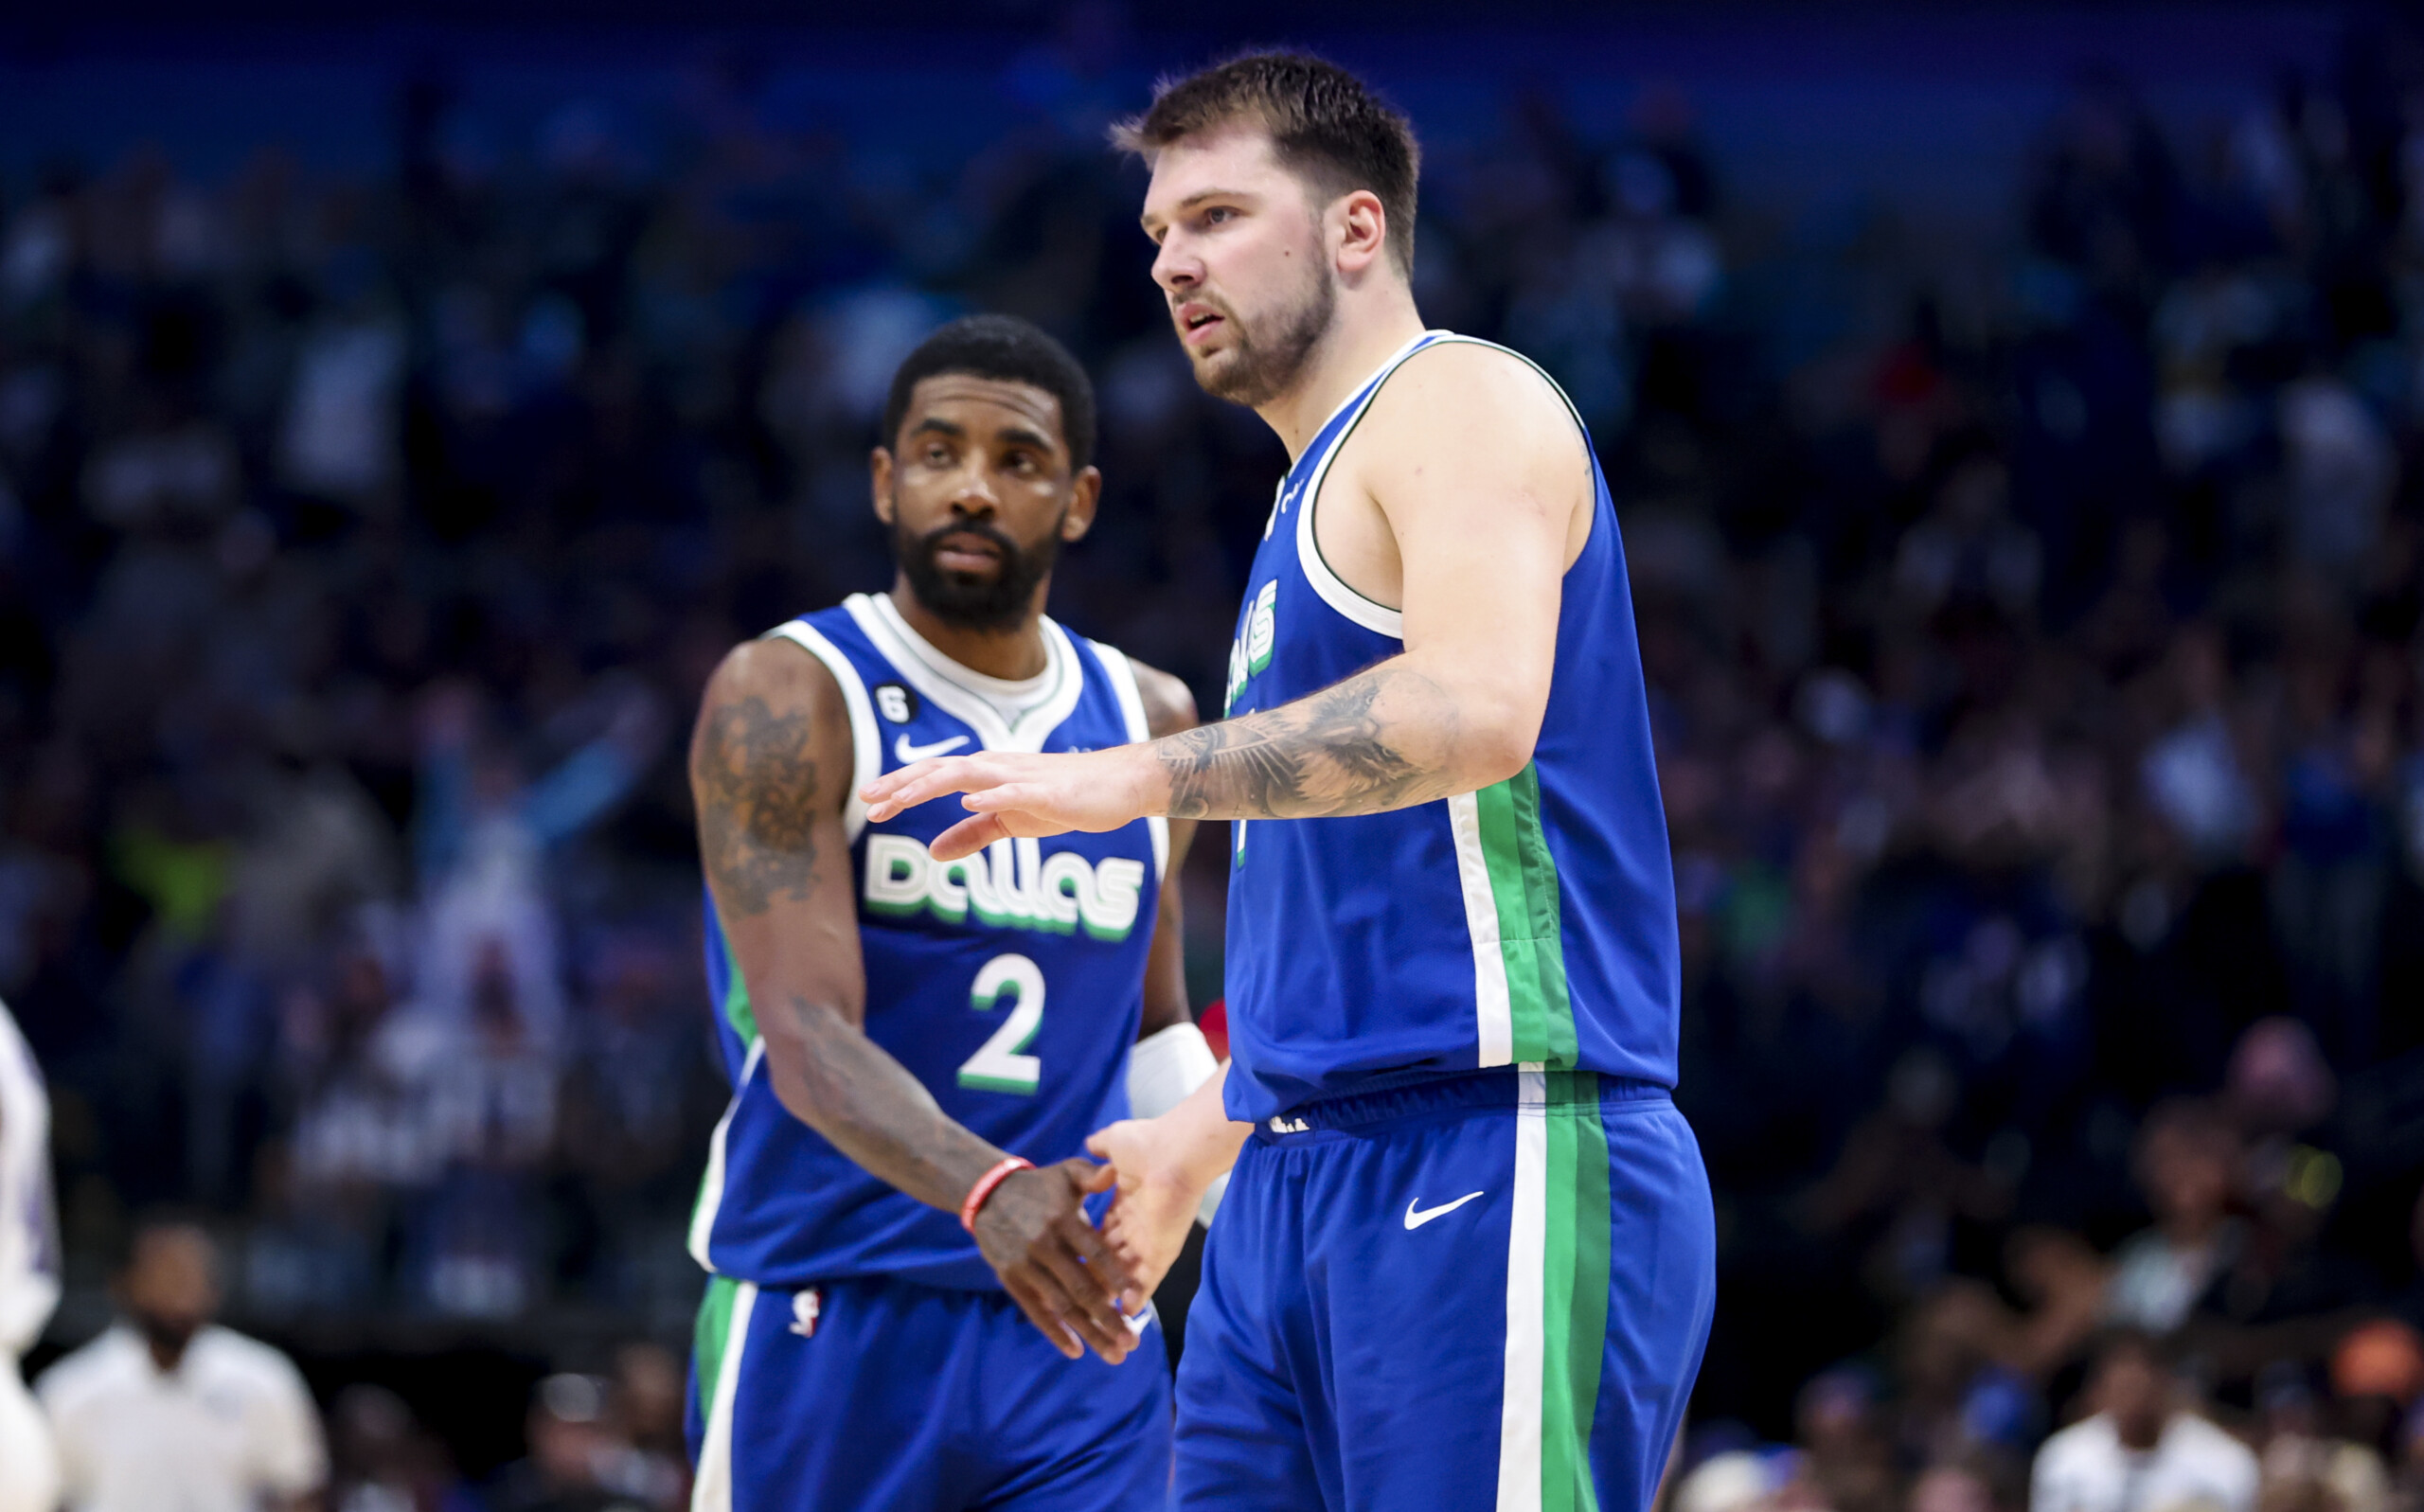 Inside the Kyrie Irving trade negotiations: Why the Mavericks beat out  Lakers, Suns and other offers - The Athletic